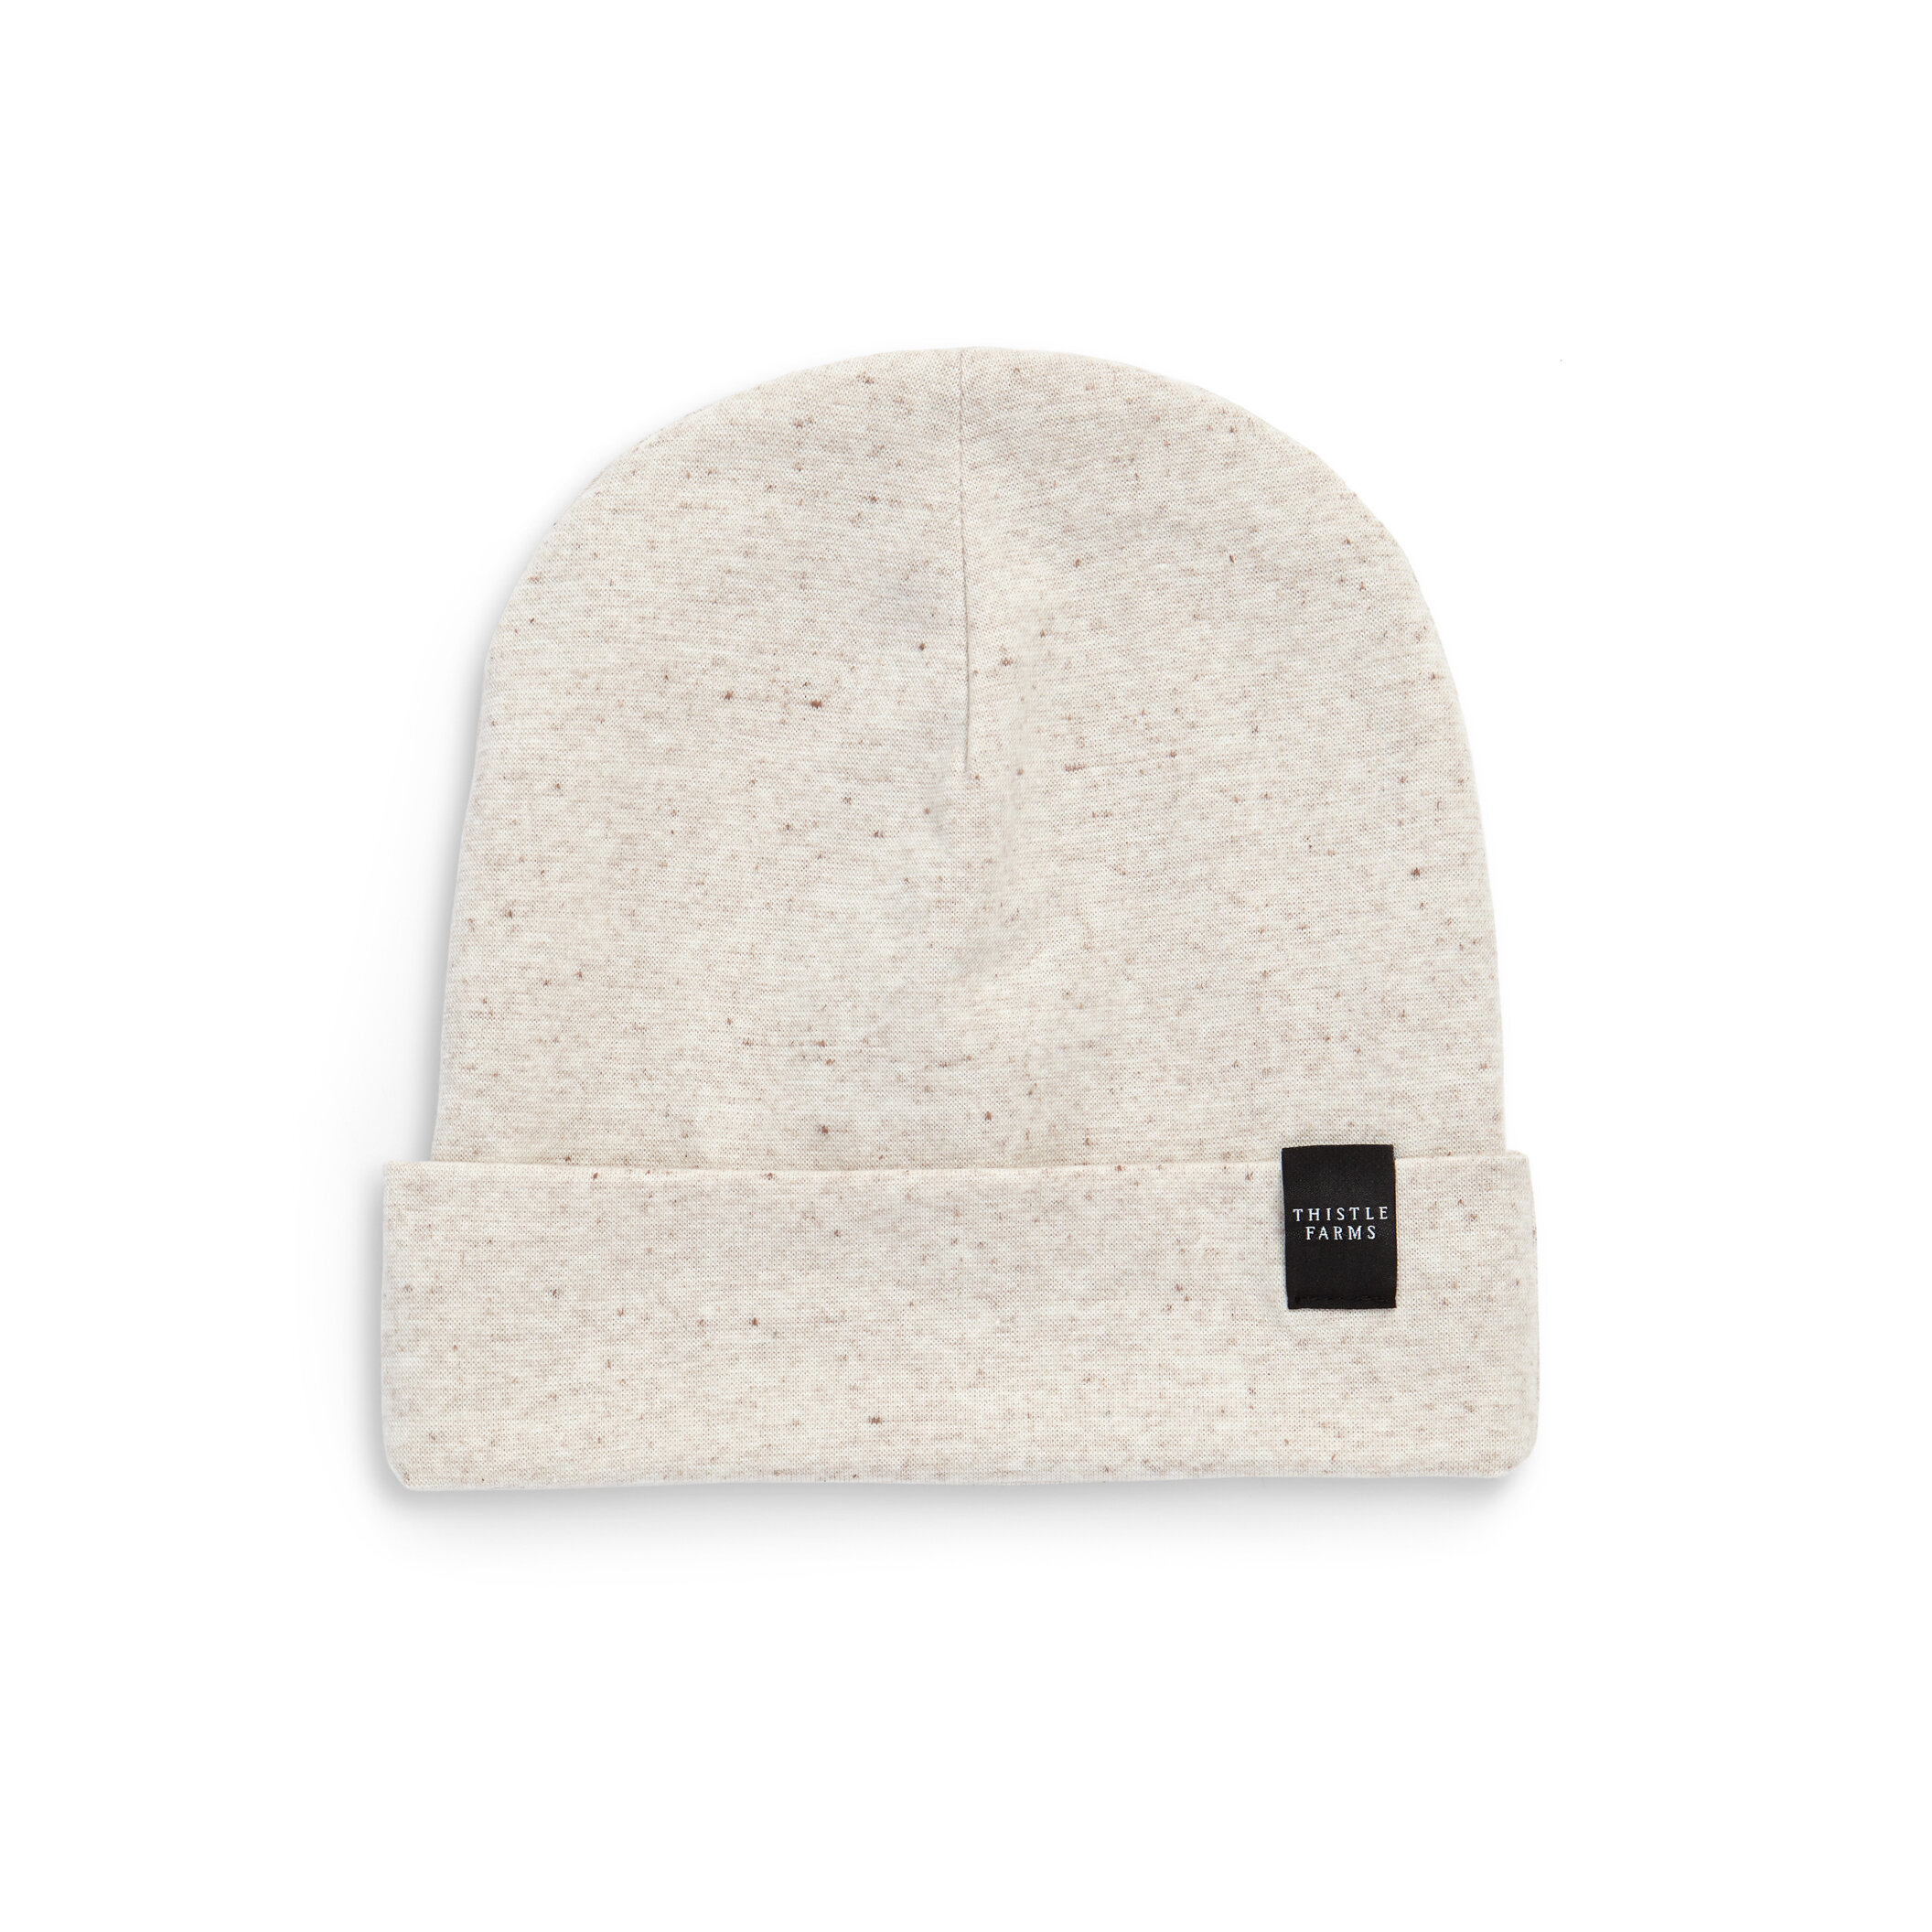 on-white-clothing-apparel-product-photo-example-beanie-hat.JPG